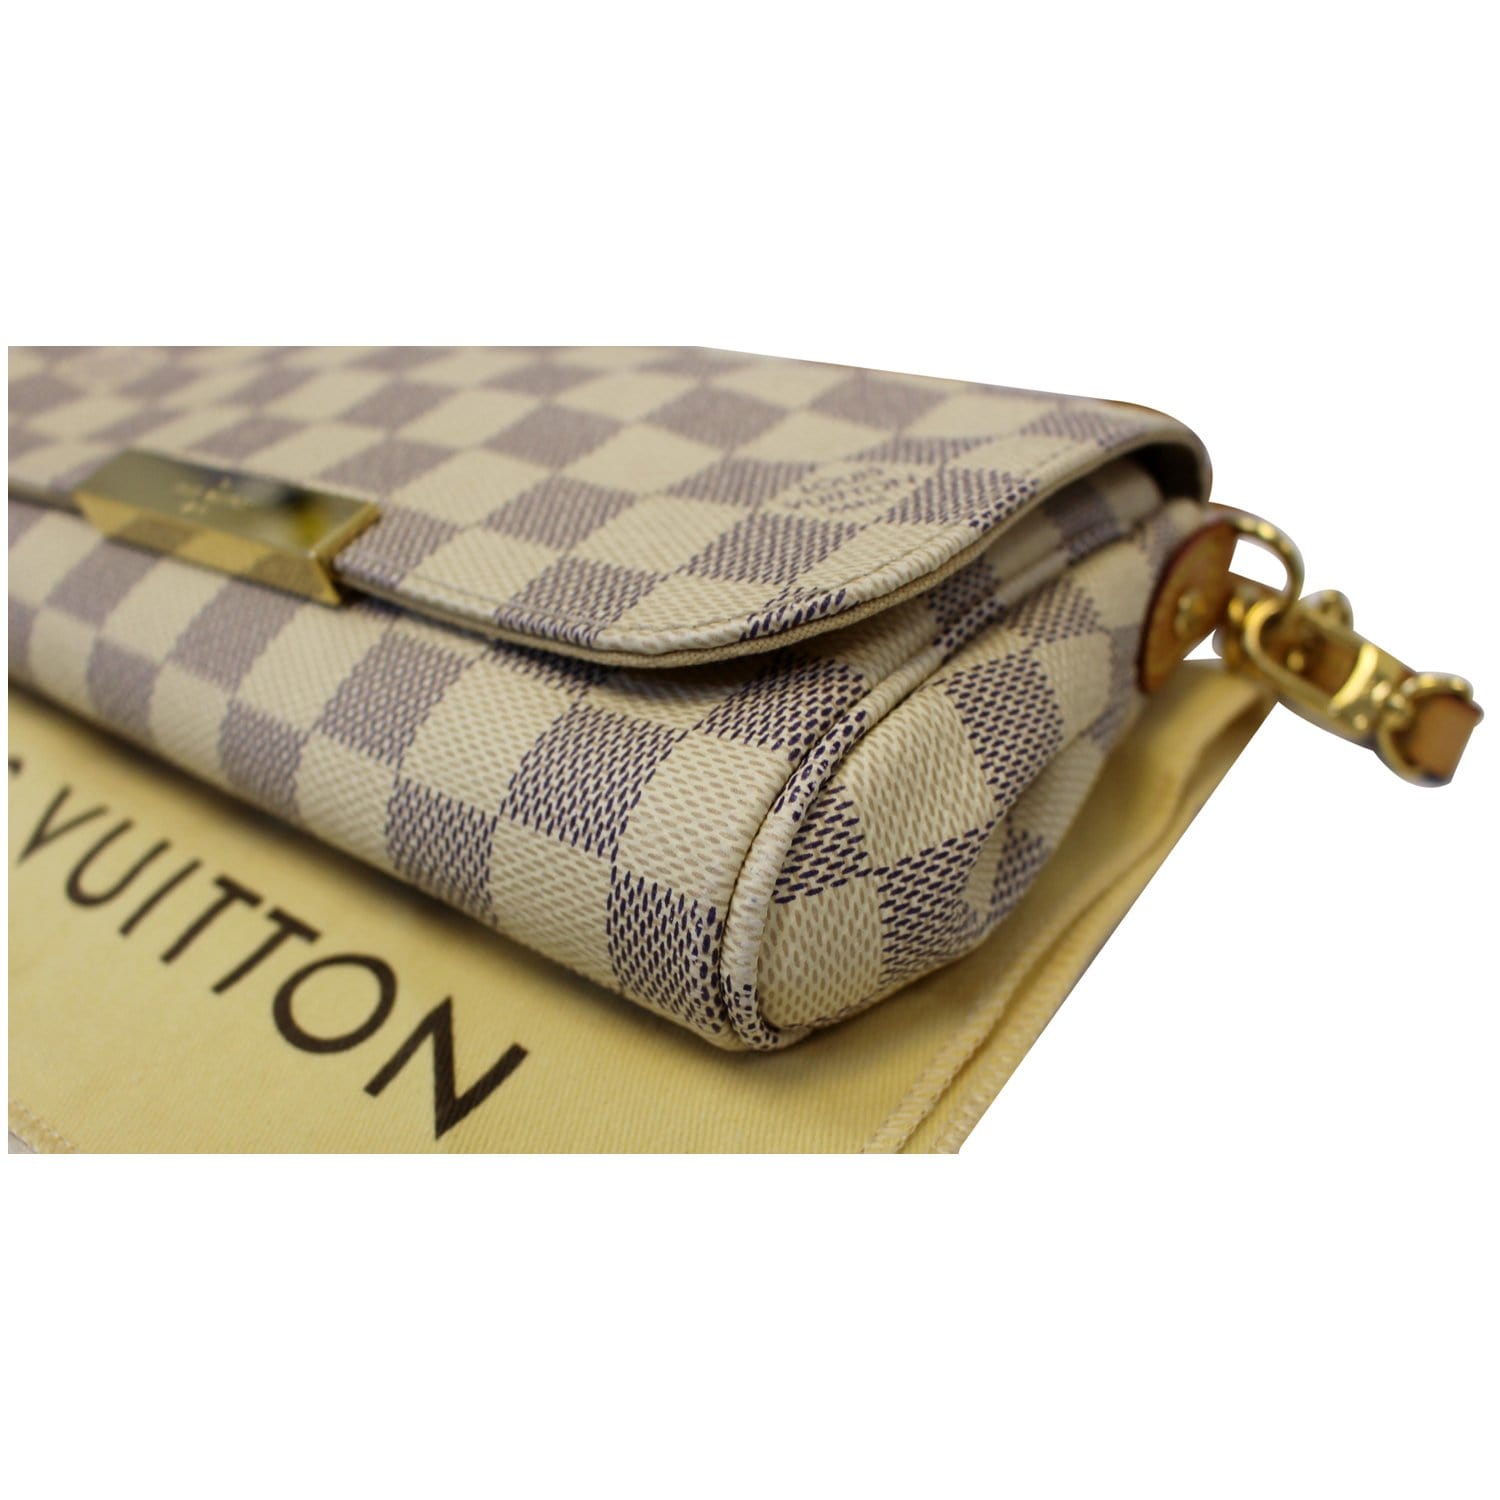 Louis Vuitton Damier Azur Canvas Favorite PM N41277, Accessorising - Brand  Name / Designer Handbags For Carry & Wear Share If You Care!